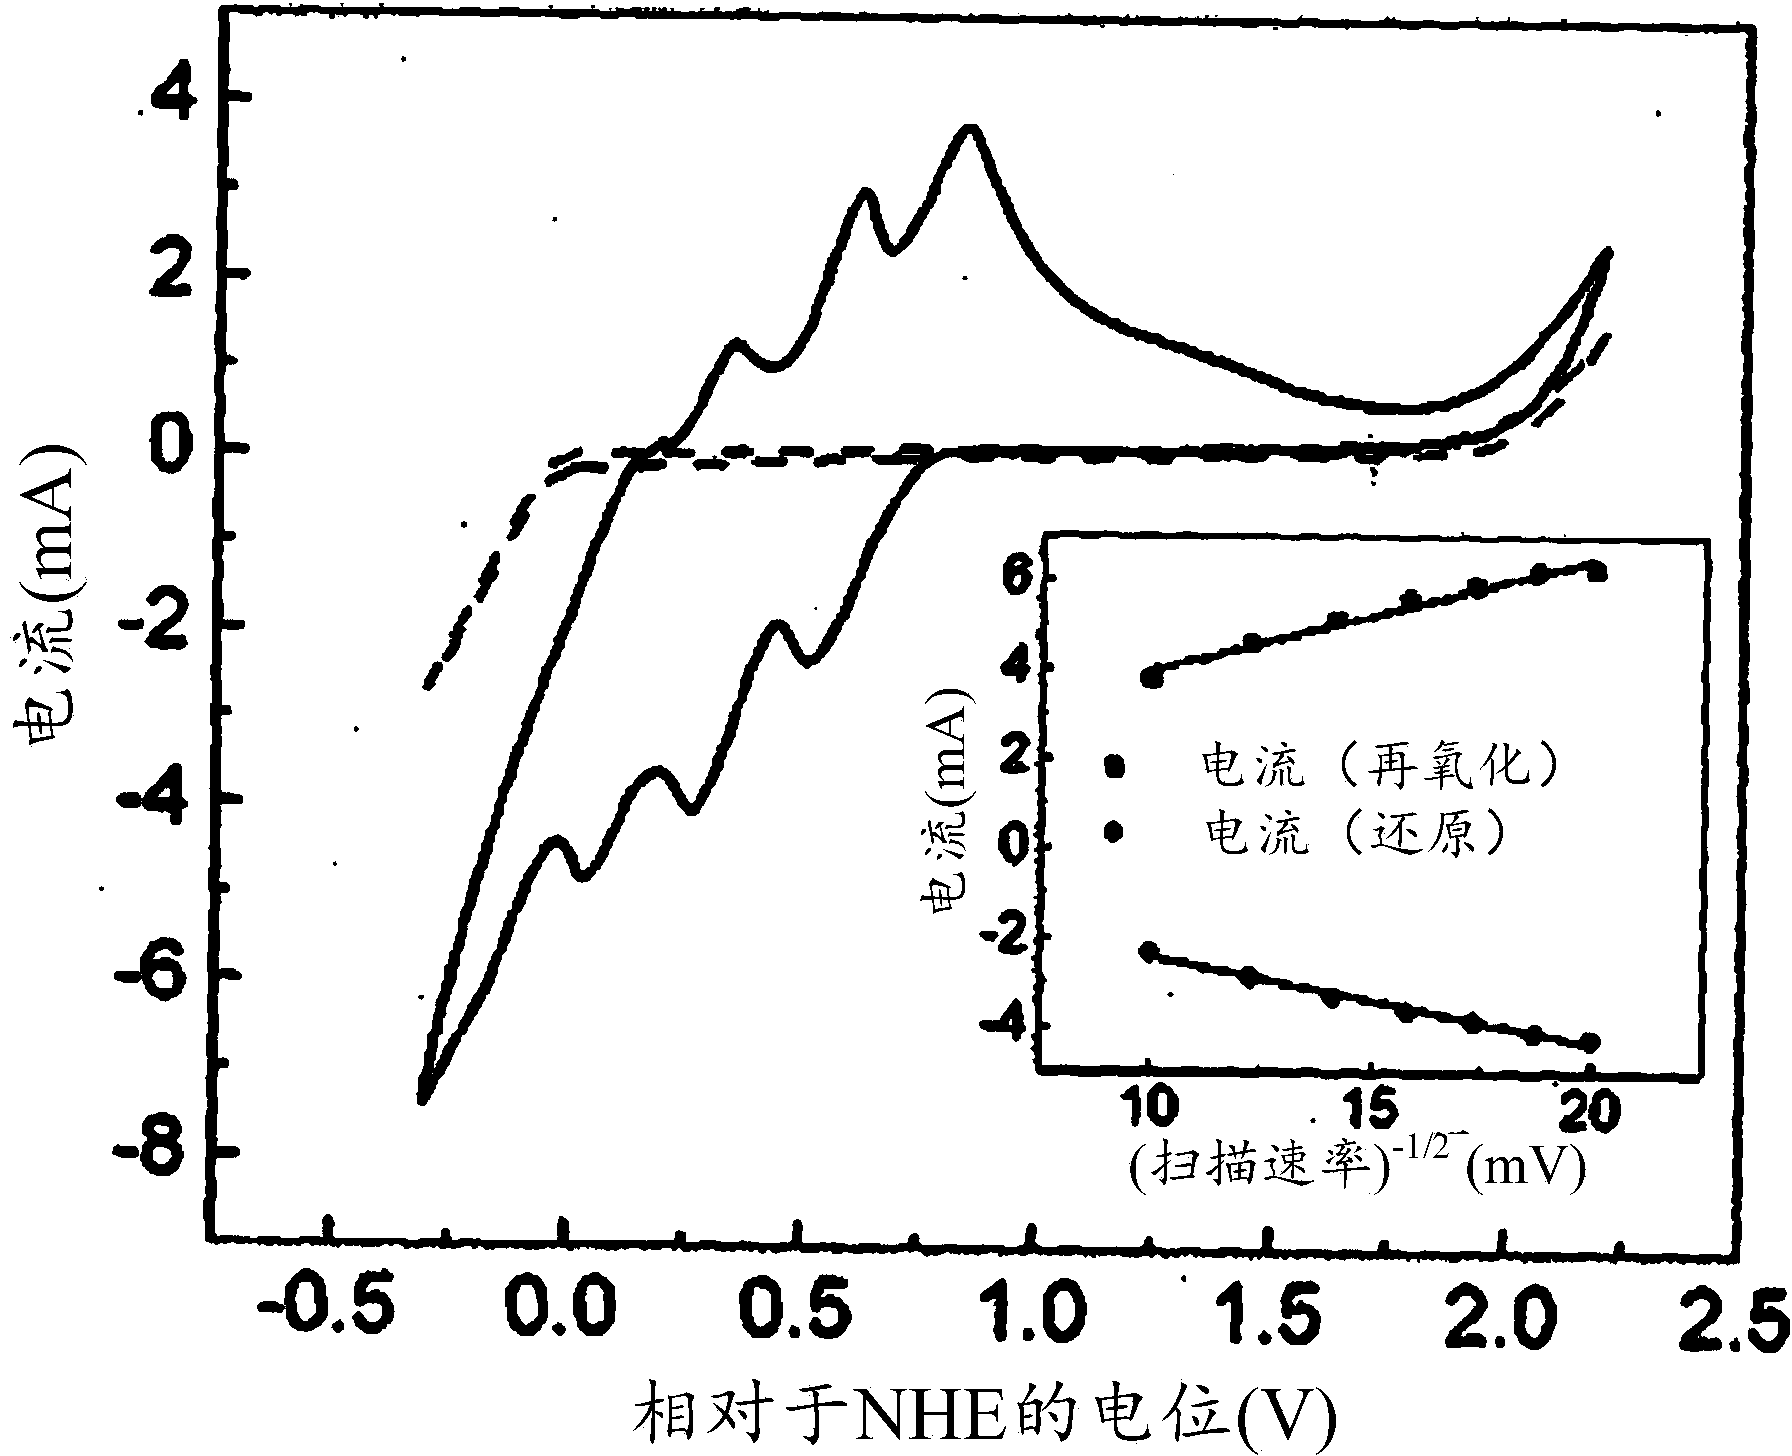 Apparatus and methods for electrochemical generation of oxygen and/or hydrogen